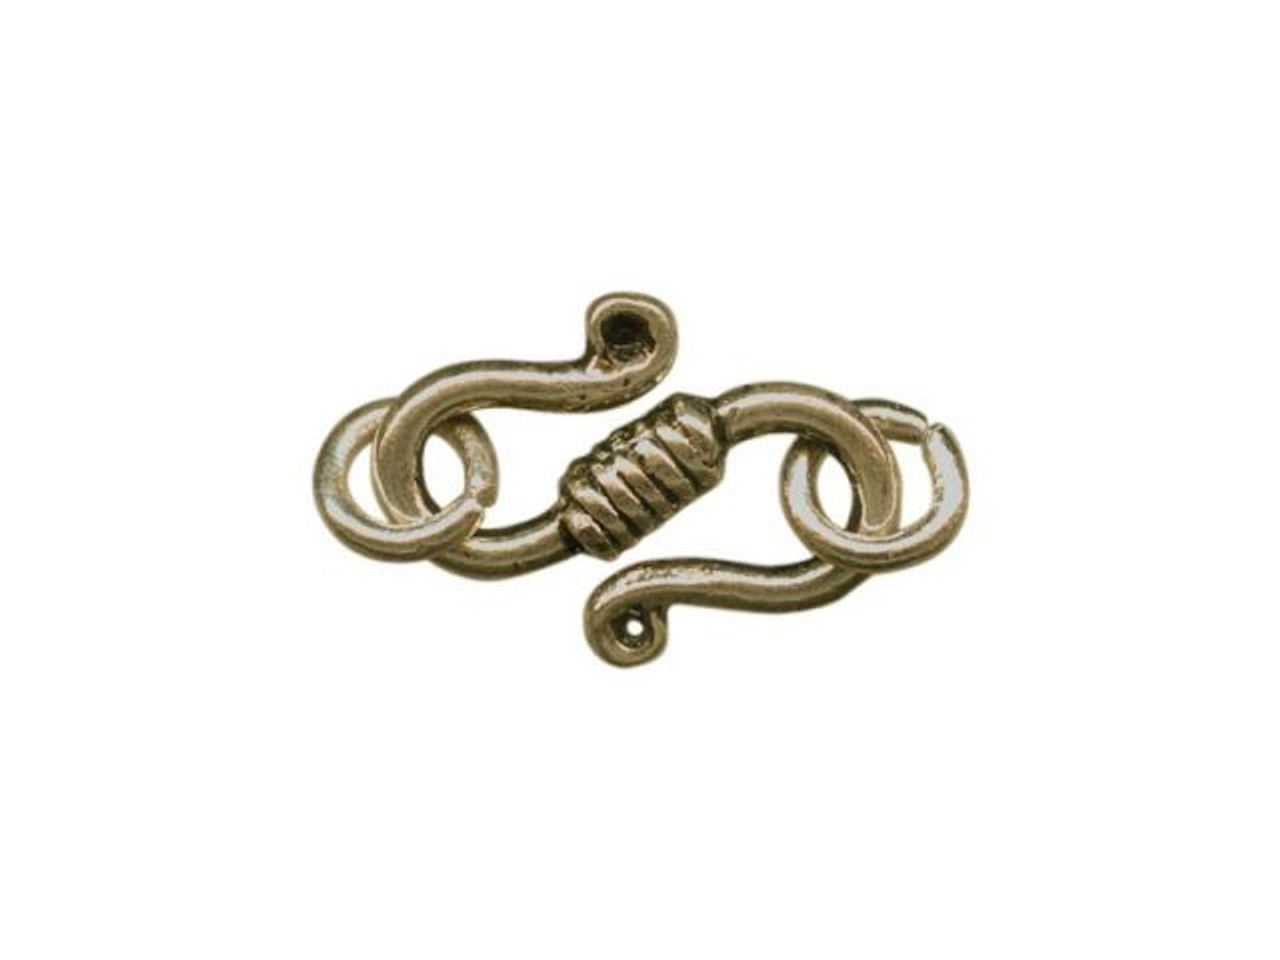 39-175-02-6 Antiqued Brass Plated Jewelry Clasp, Cast, S, Wrapped -  (Clearance) - Rings & Things